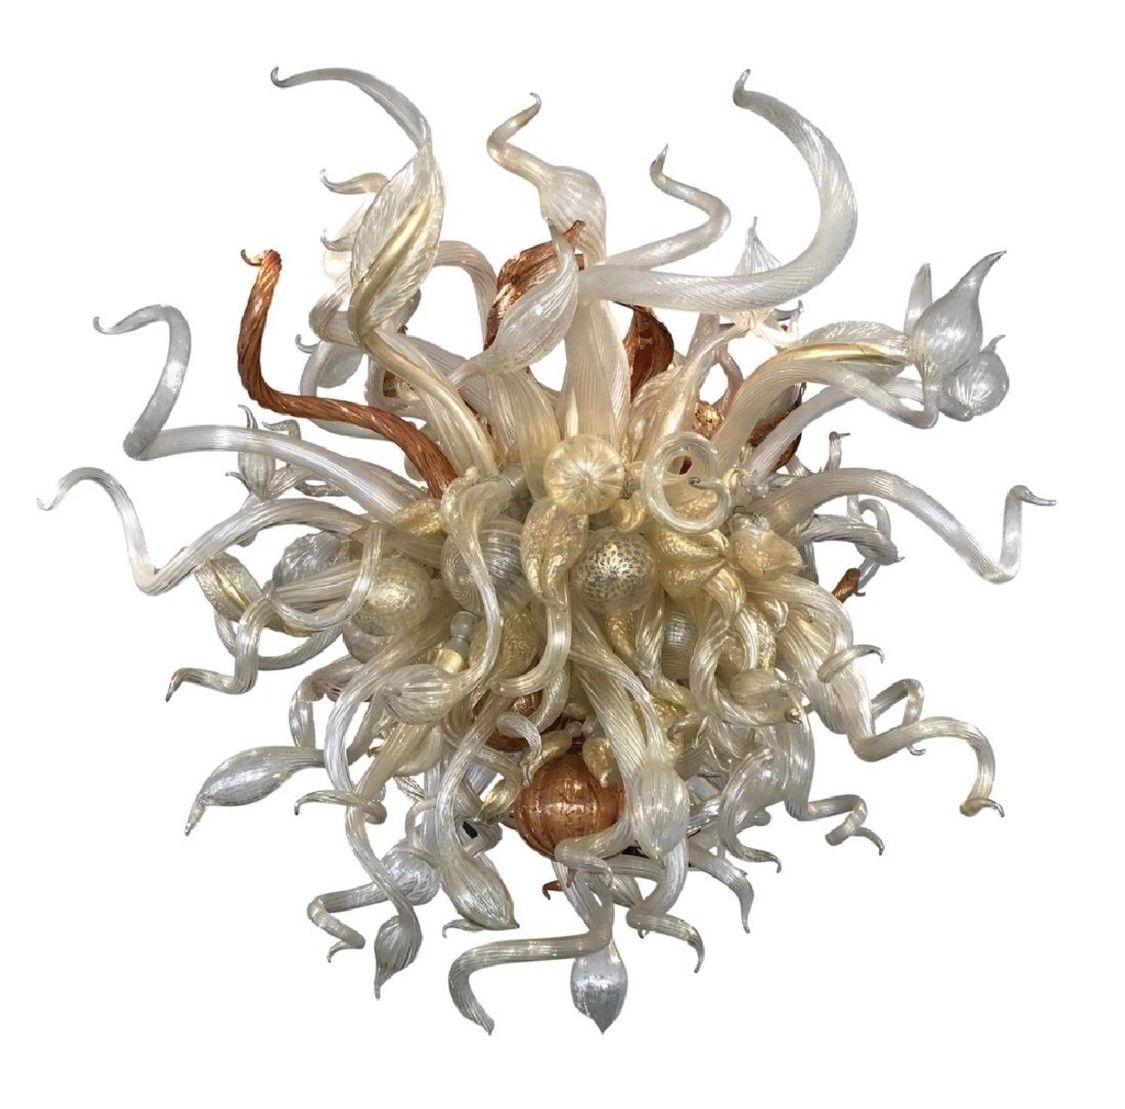 Dale Chihuly Abstract Sculpture - Chihuly Chandelier 5' x 4', 250 pieces includes professional install worldwide